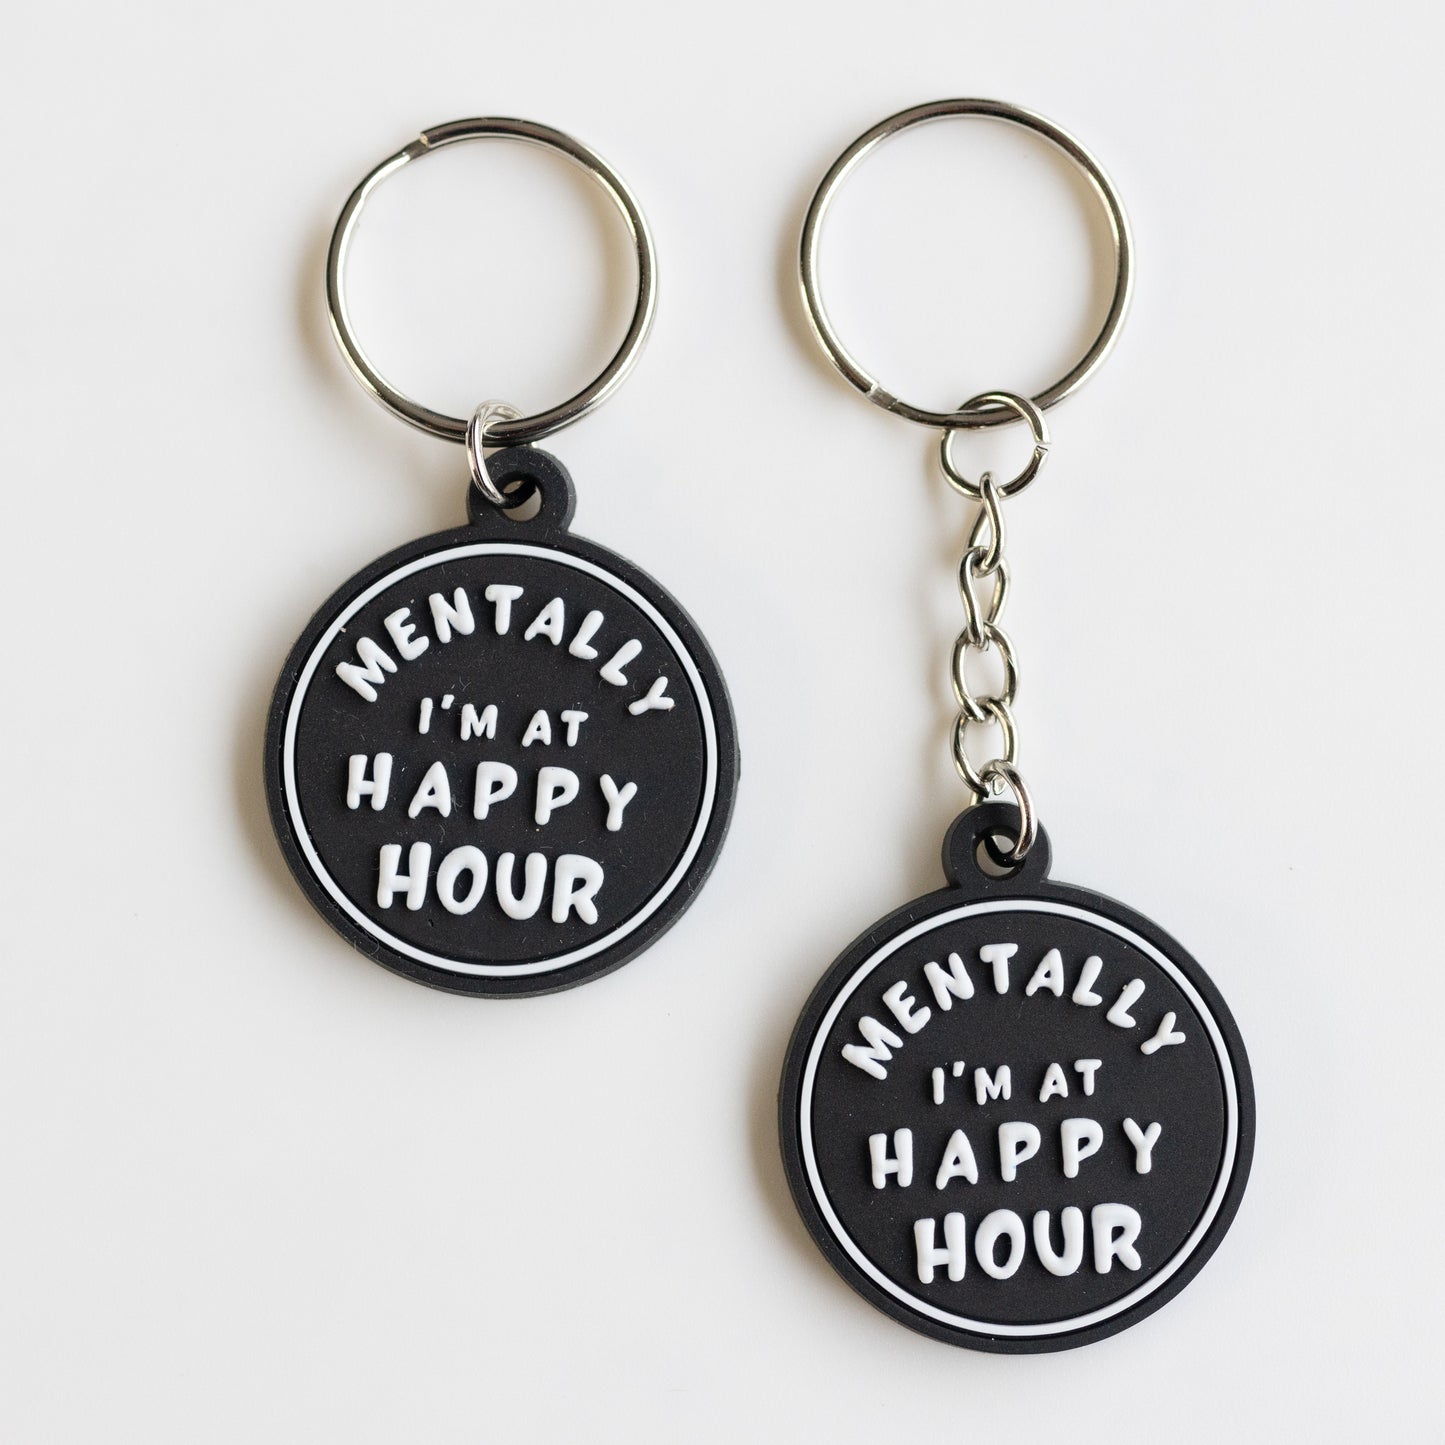 Funny Dog Collar Charm - Mentally I'm at Happy Hour